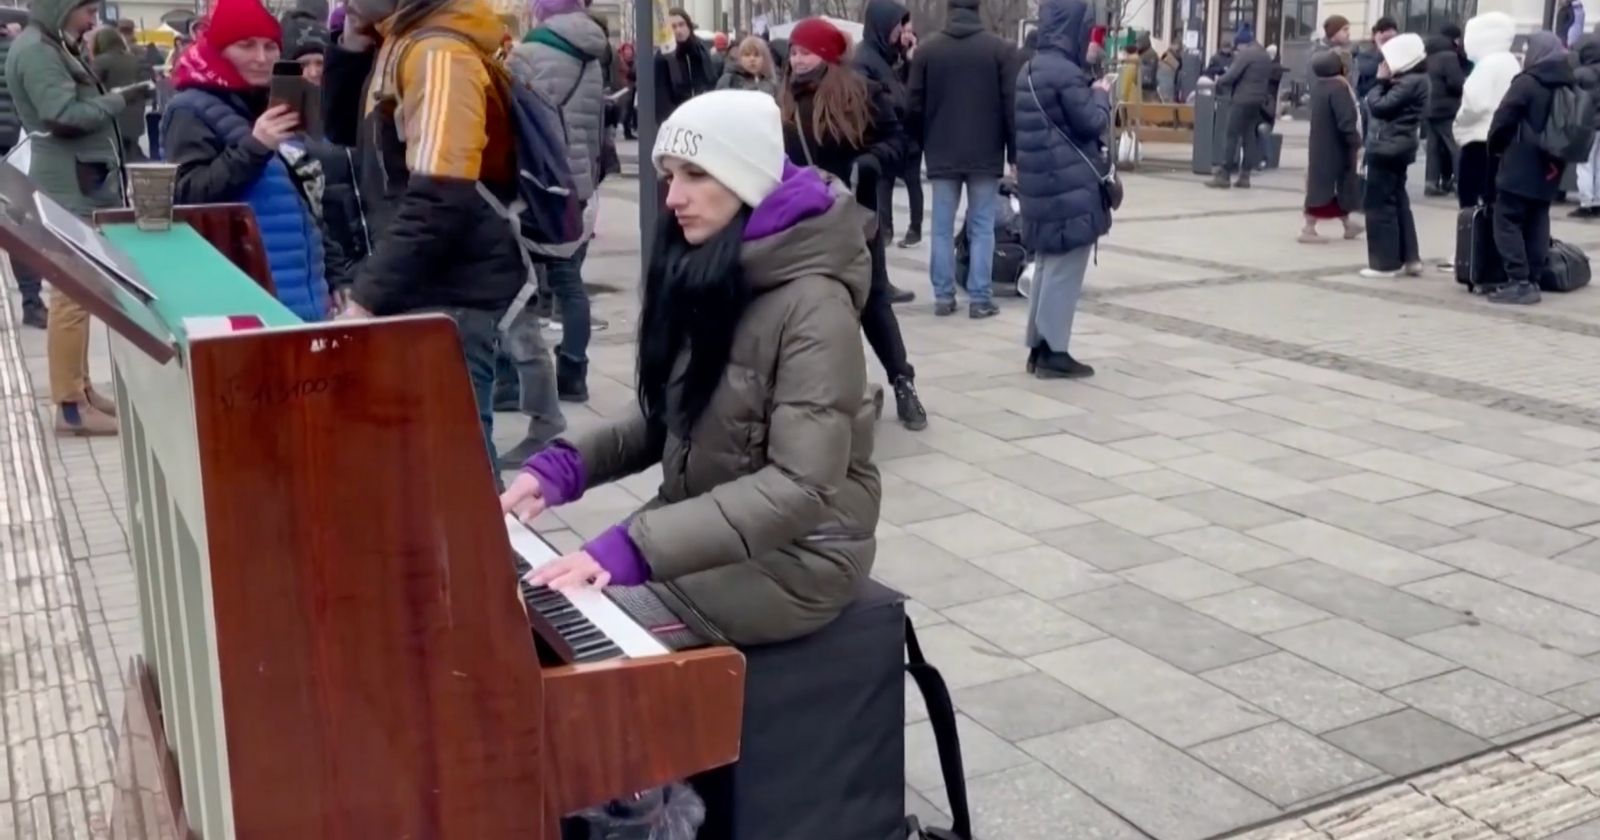 VIDEO.  Ukraine: on the forecourt of the Lviv station, she plays "What a wonderful world" on the piano